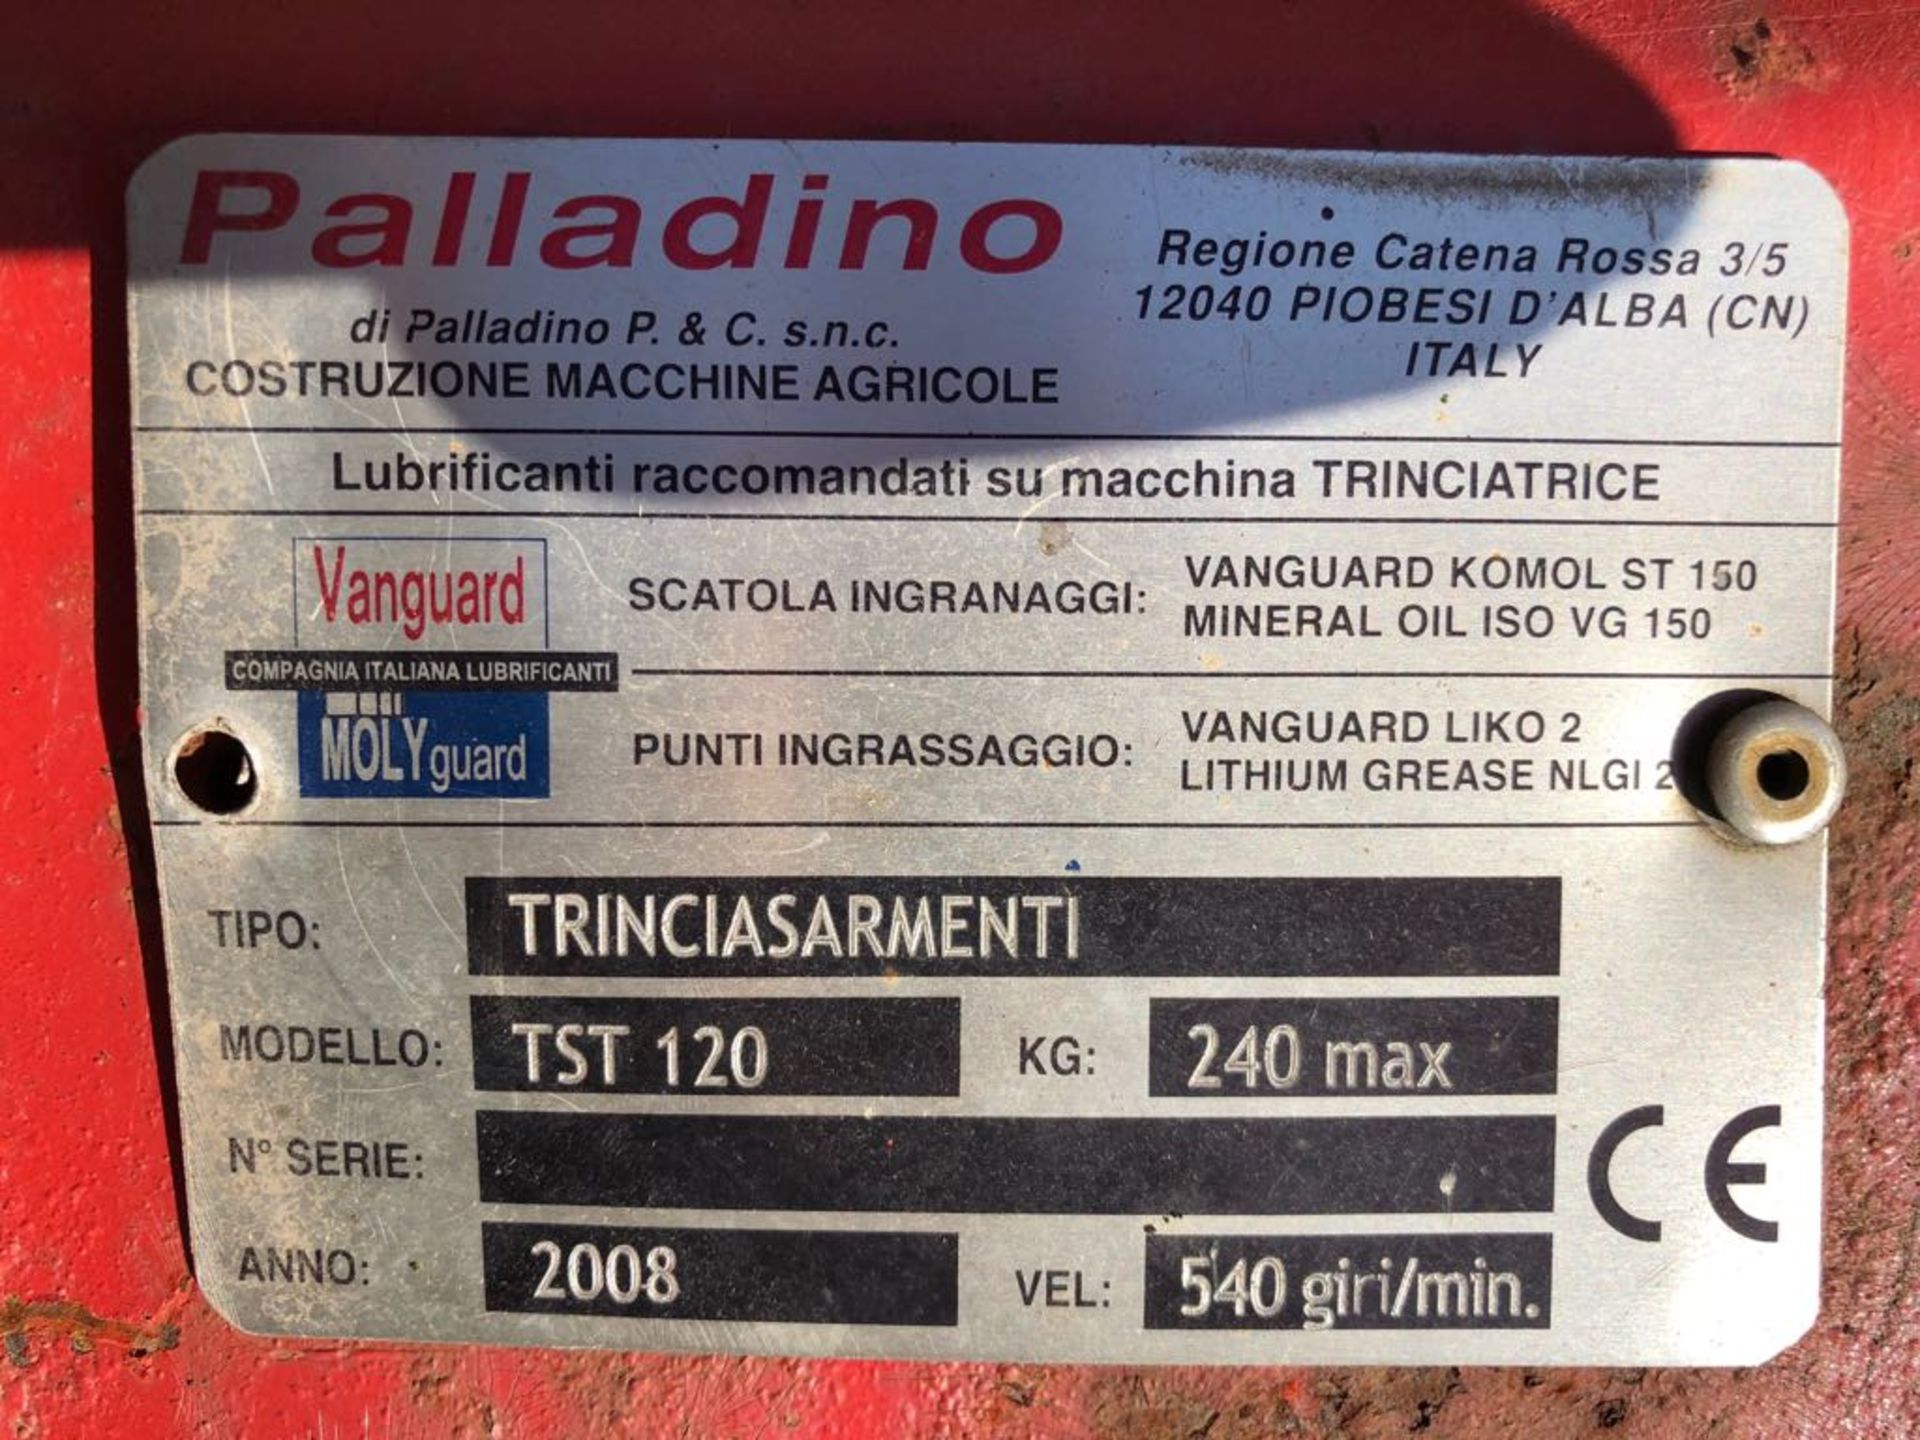 2008 PALLADINO TRINCIASARMENTI 4FT FLAIL MOWER WITH HEAVY DUTY BLADES FOR A COMPACT TRACTOR - Image 3 of 5